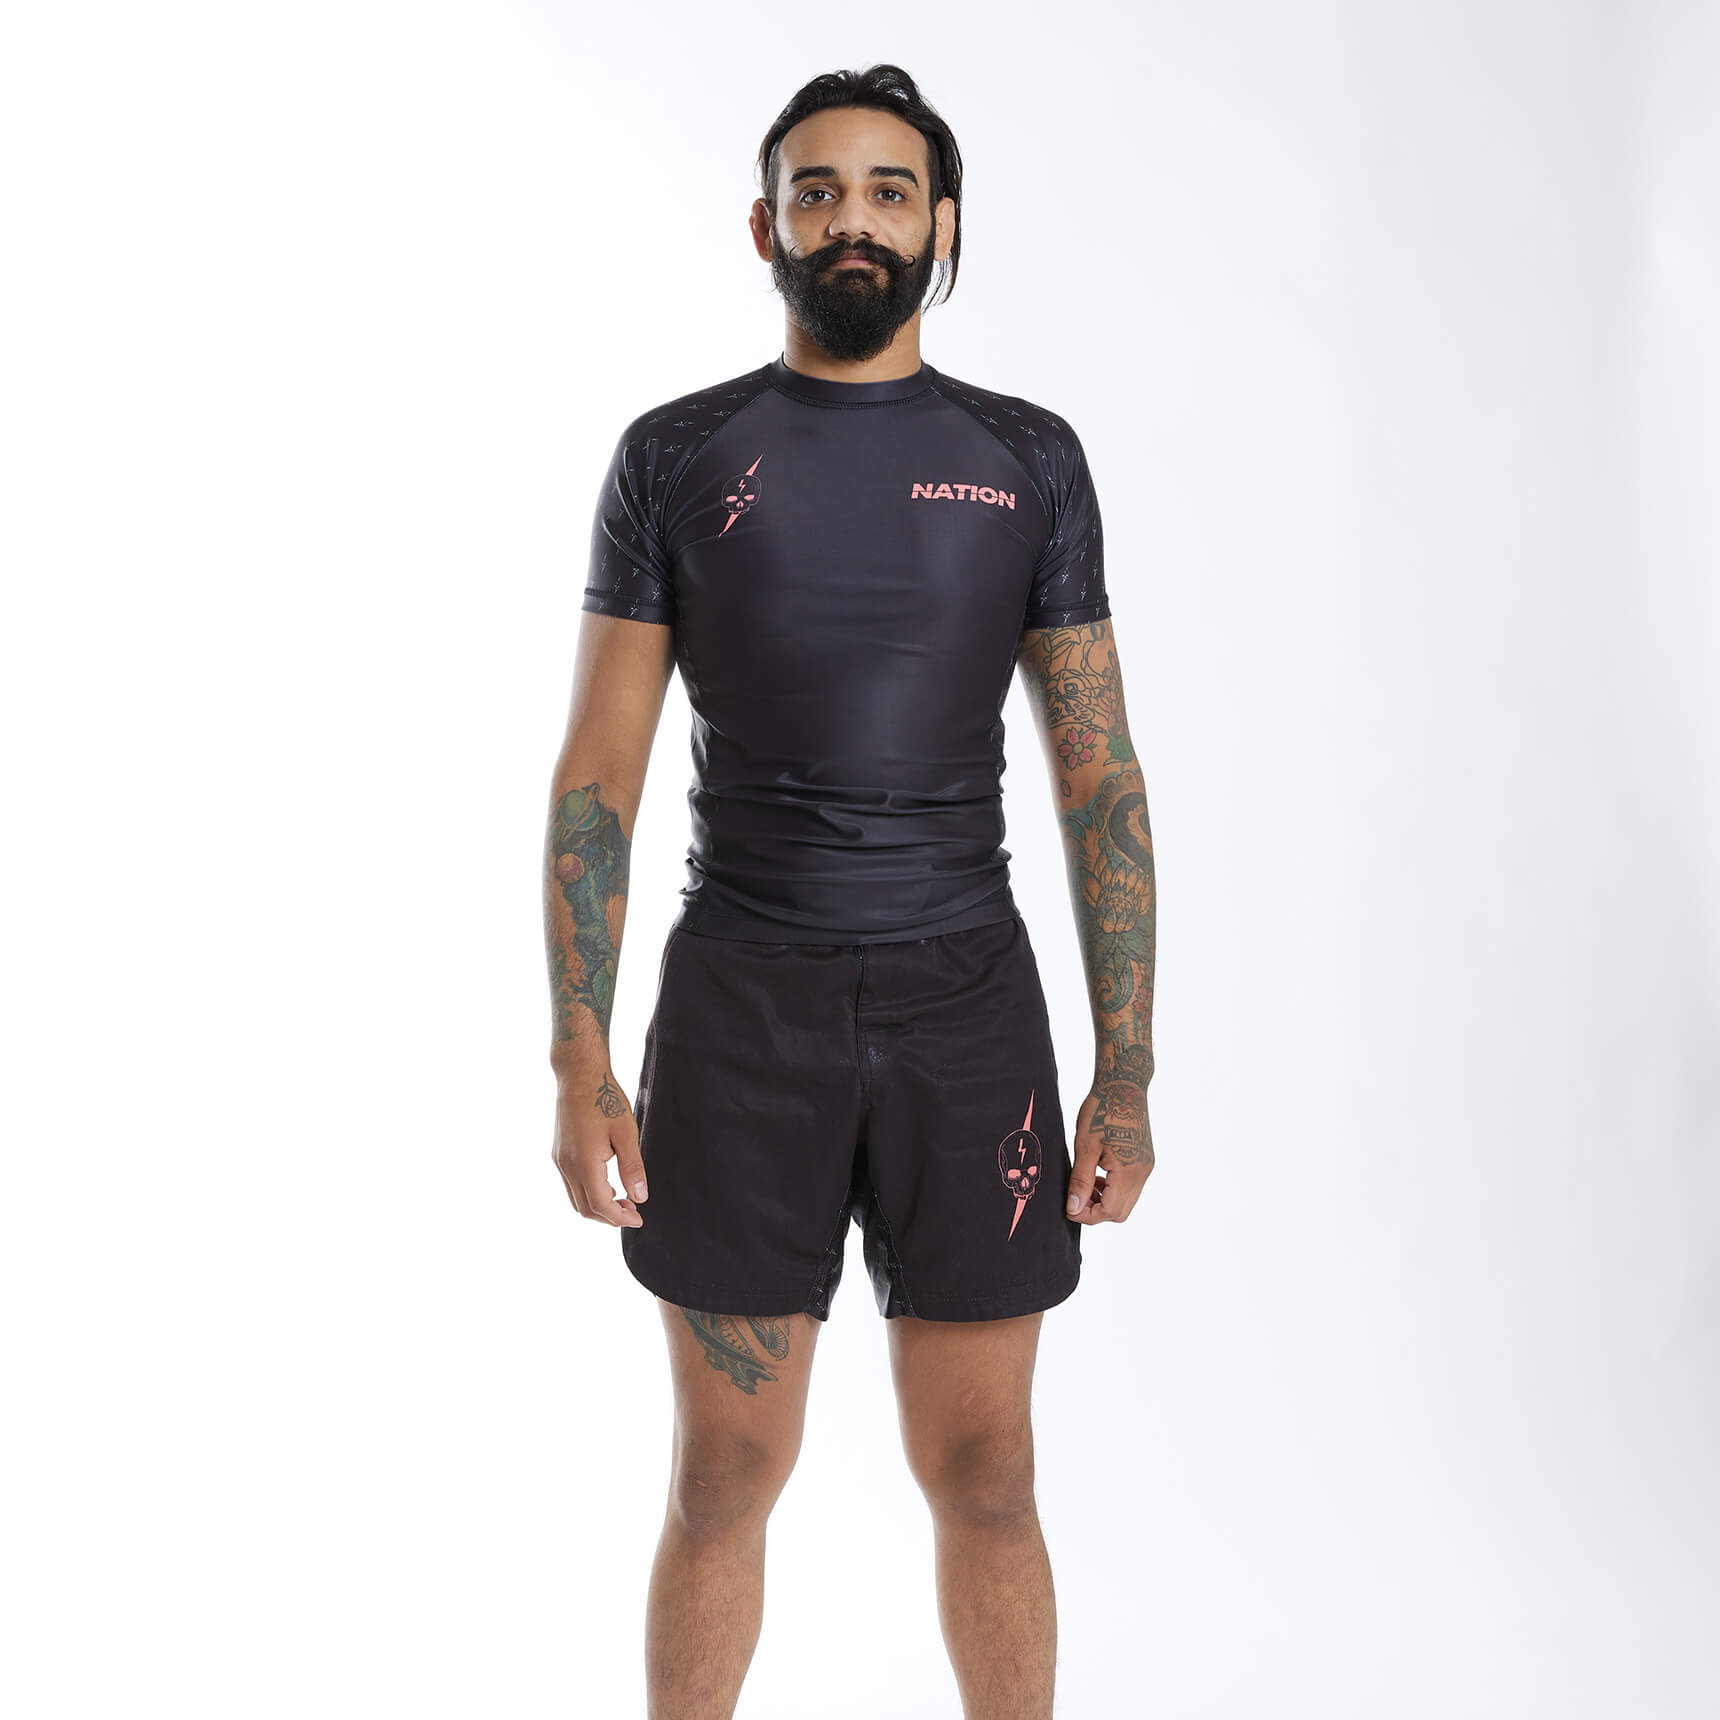 Shop Nation Athletic BJJ Rash guards! Browse our selection of Jiu Jitsu Rash Guards, BJJ Gis &amp; Nogi Grappling Shorts from one of the top BJJ Gear brands!